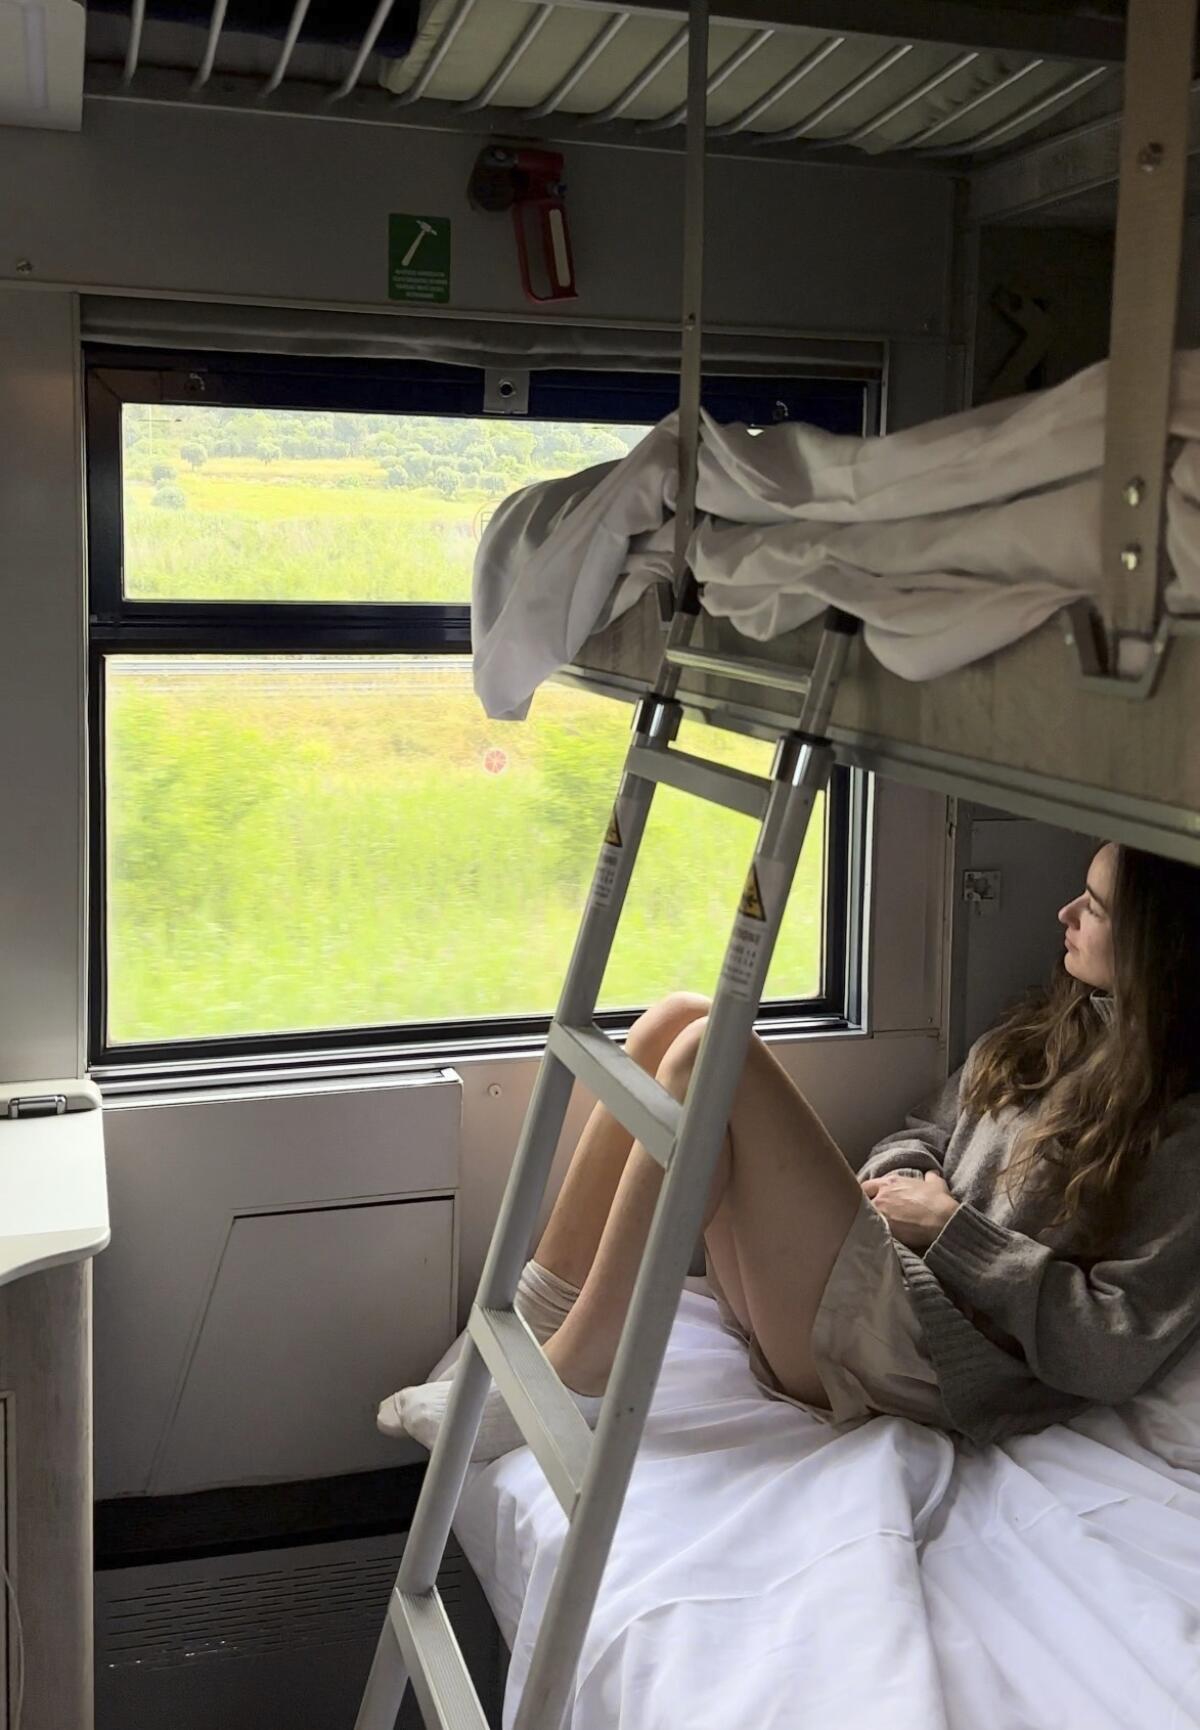 A young woman looks out at the Italian countryside on TrenItalia's Intercity Notte sleeper train from Palermo to Rome.